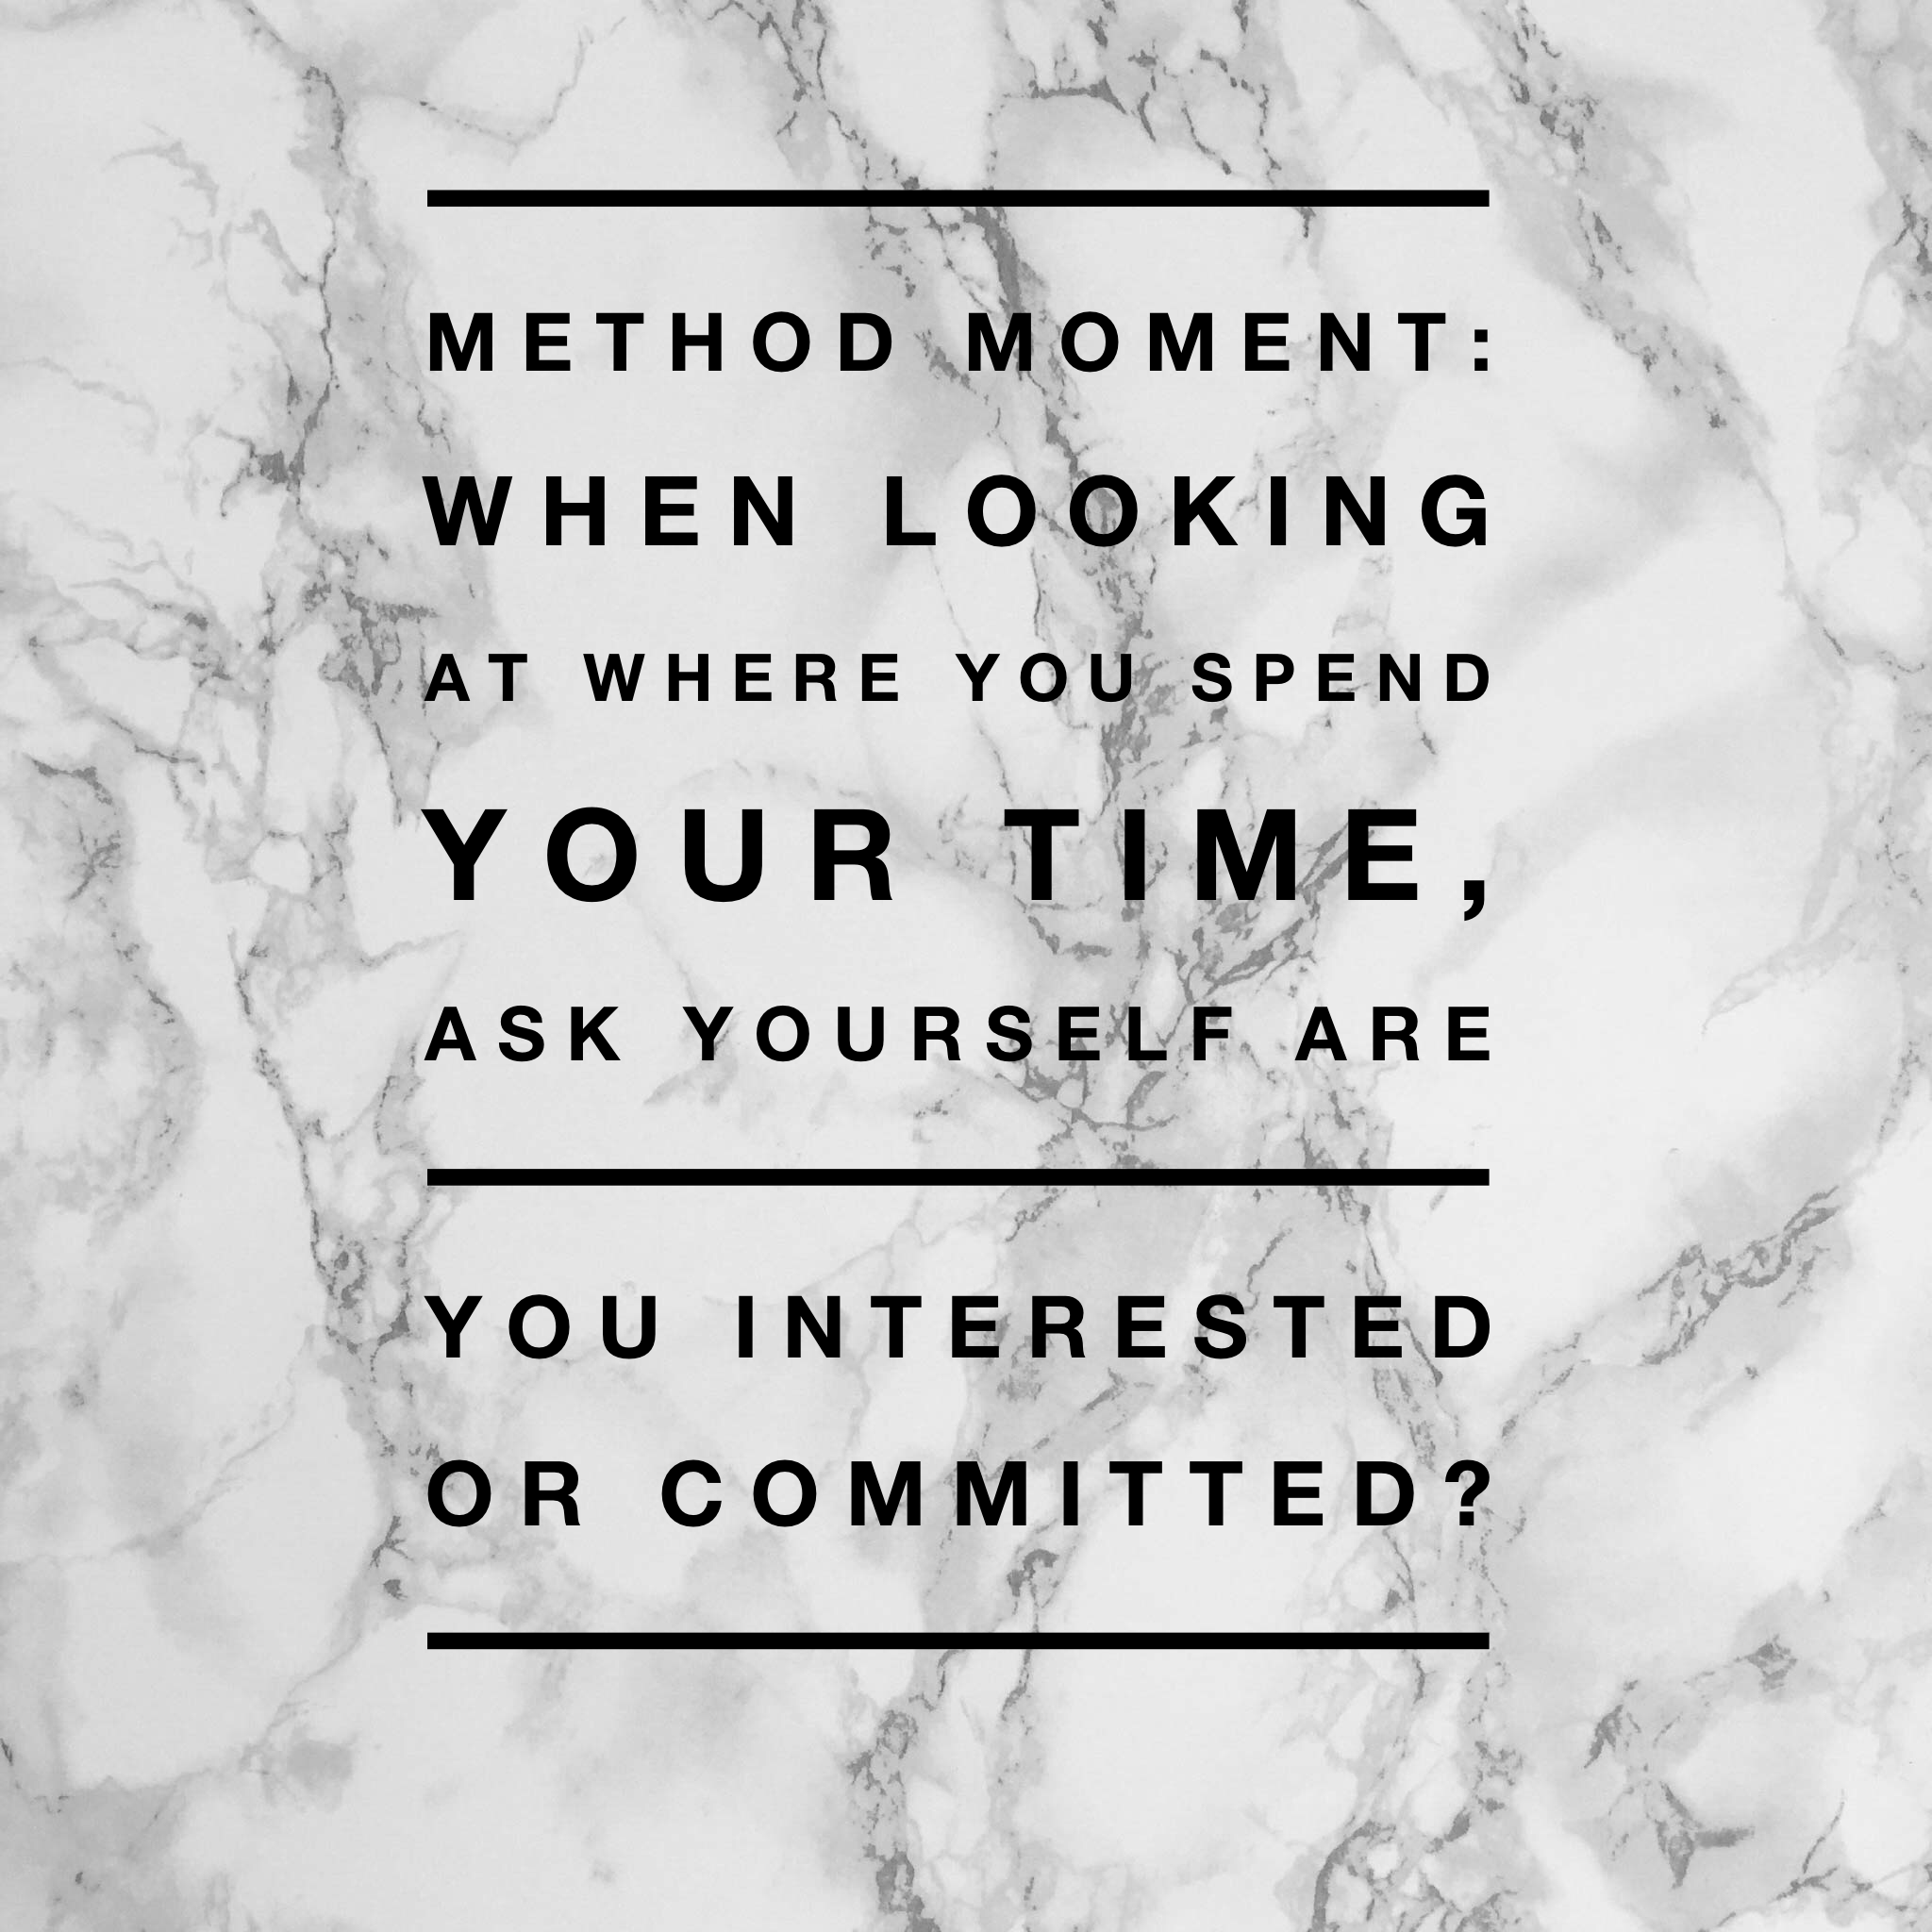 method moment, interested or committed, focus, work, relationships, life work balance, making decisions,